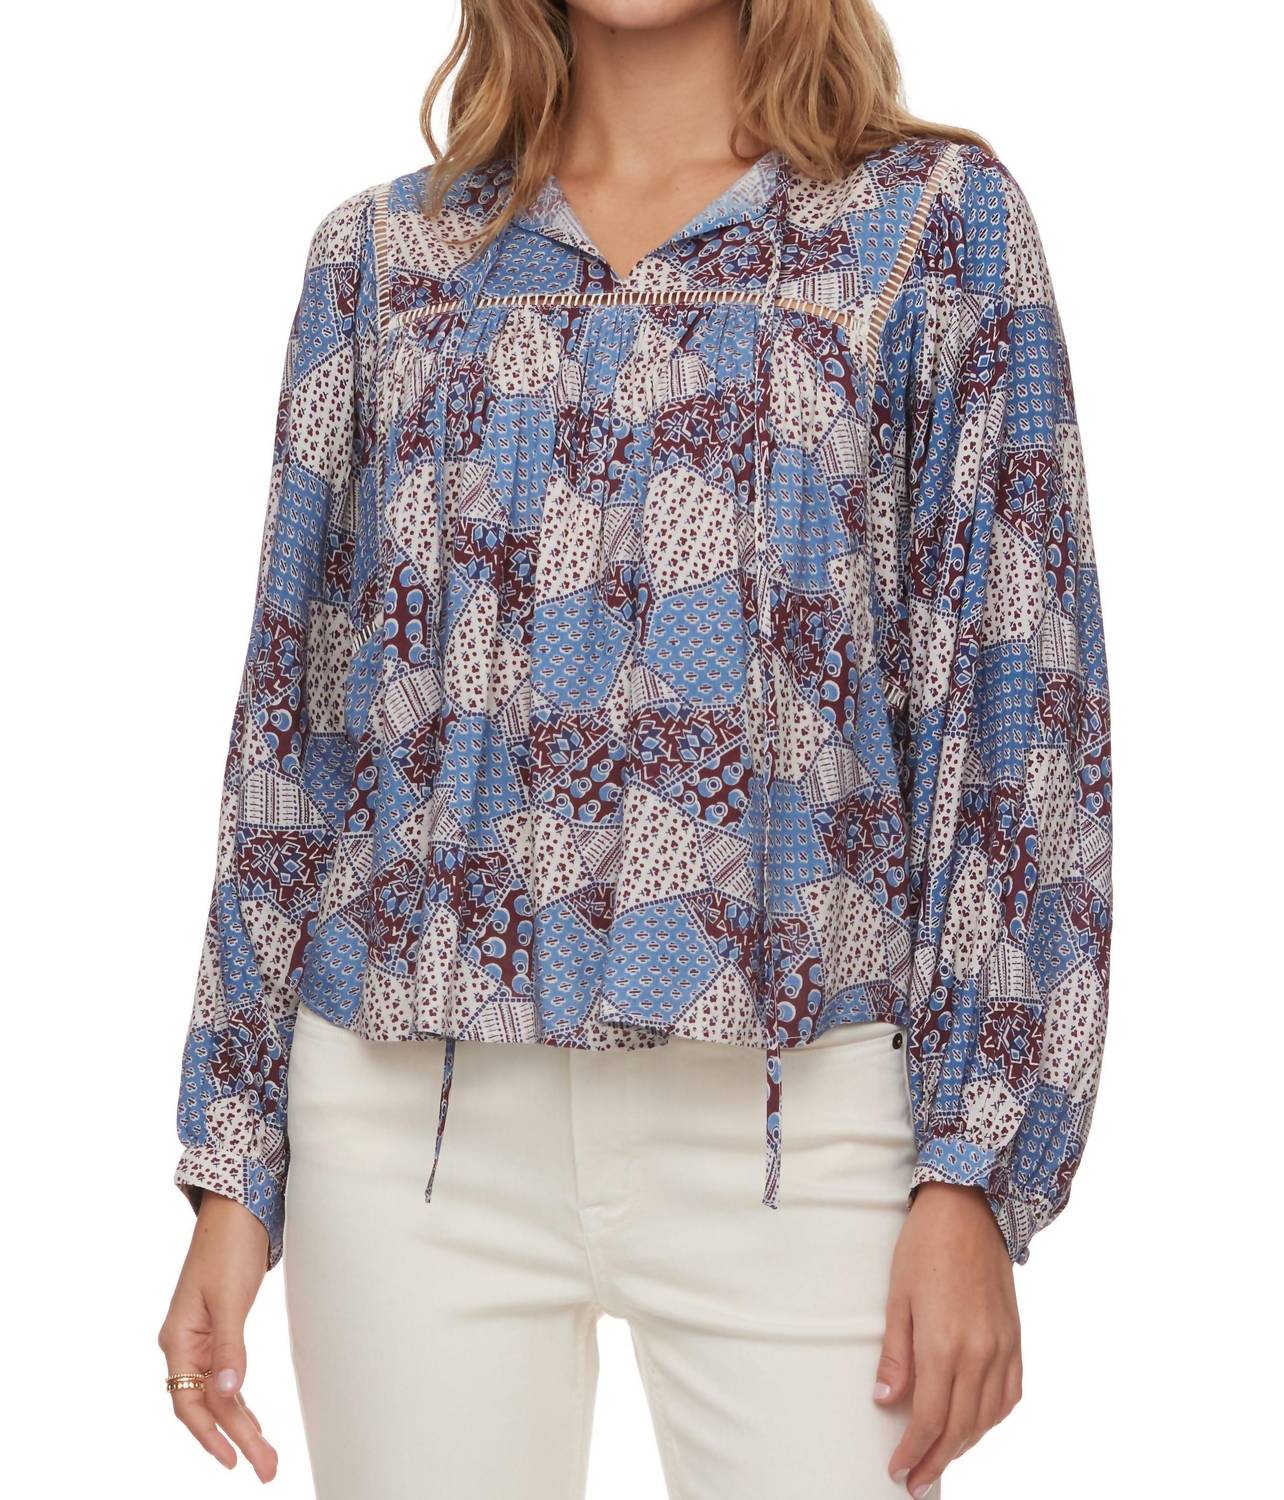 Flags & Anthem Harlan Peekaboo Peasant Top In White And Blue Large female